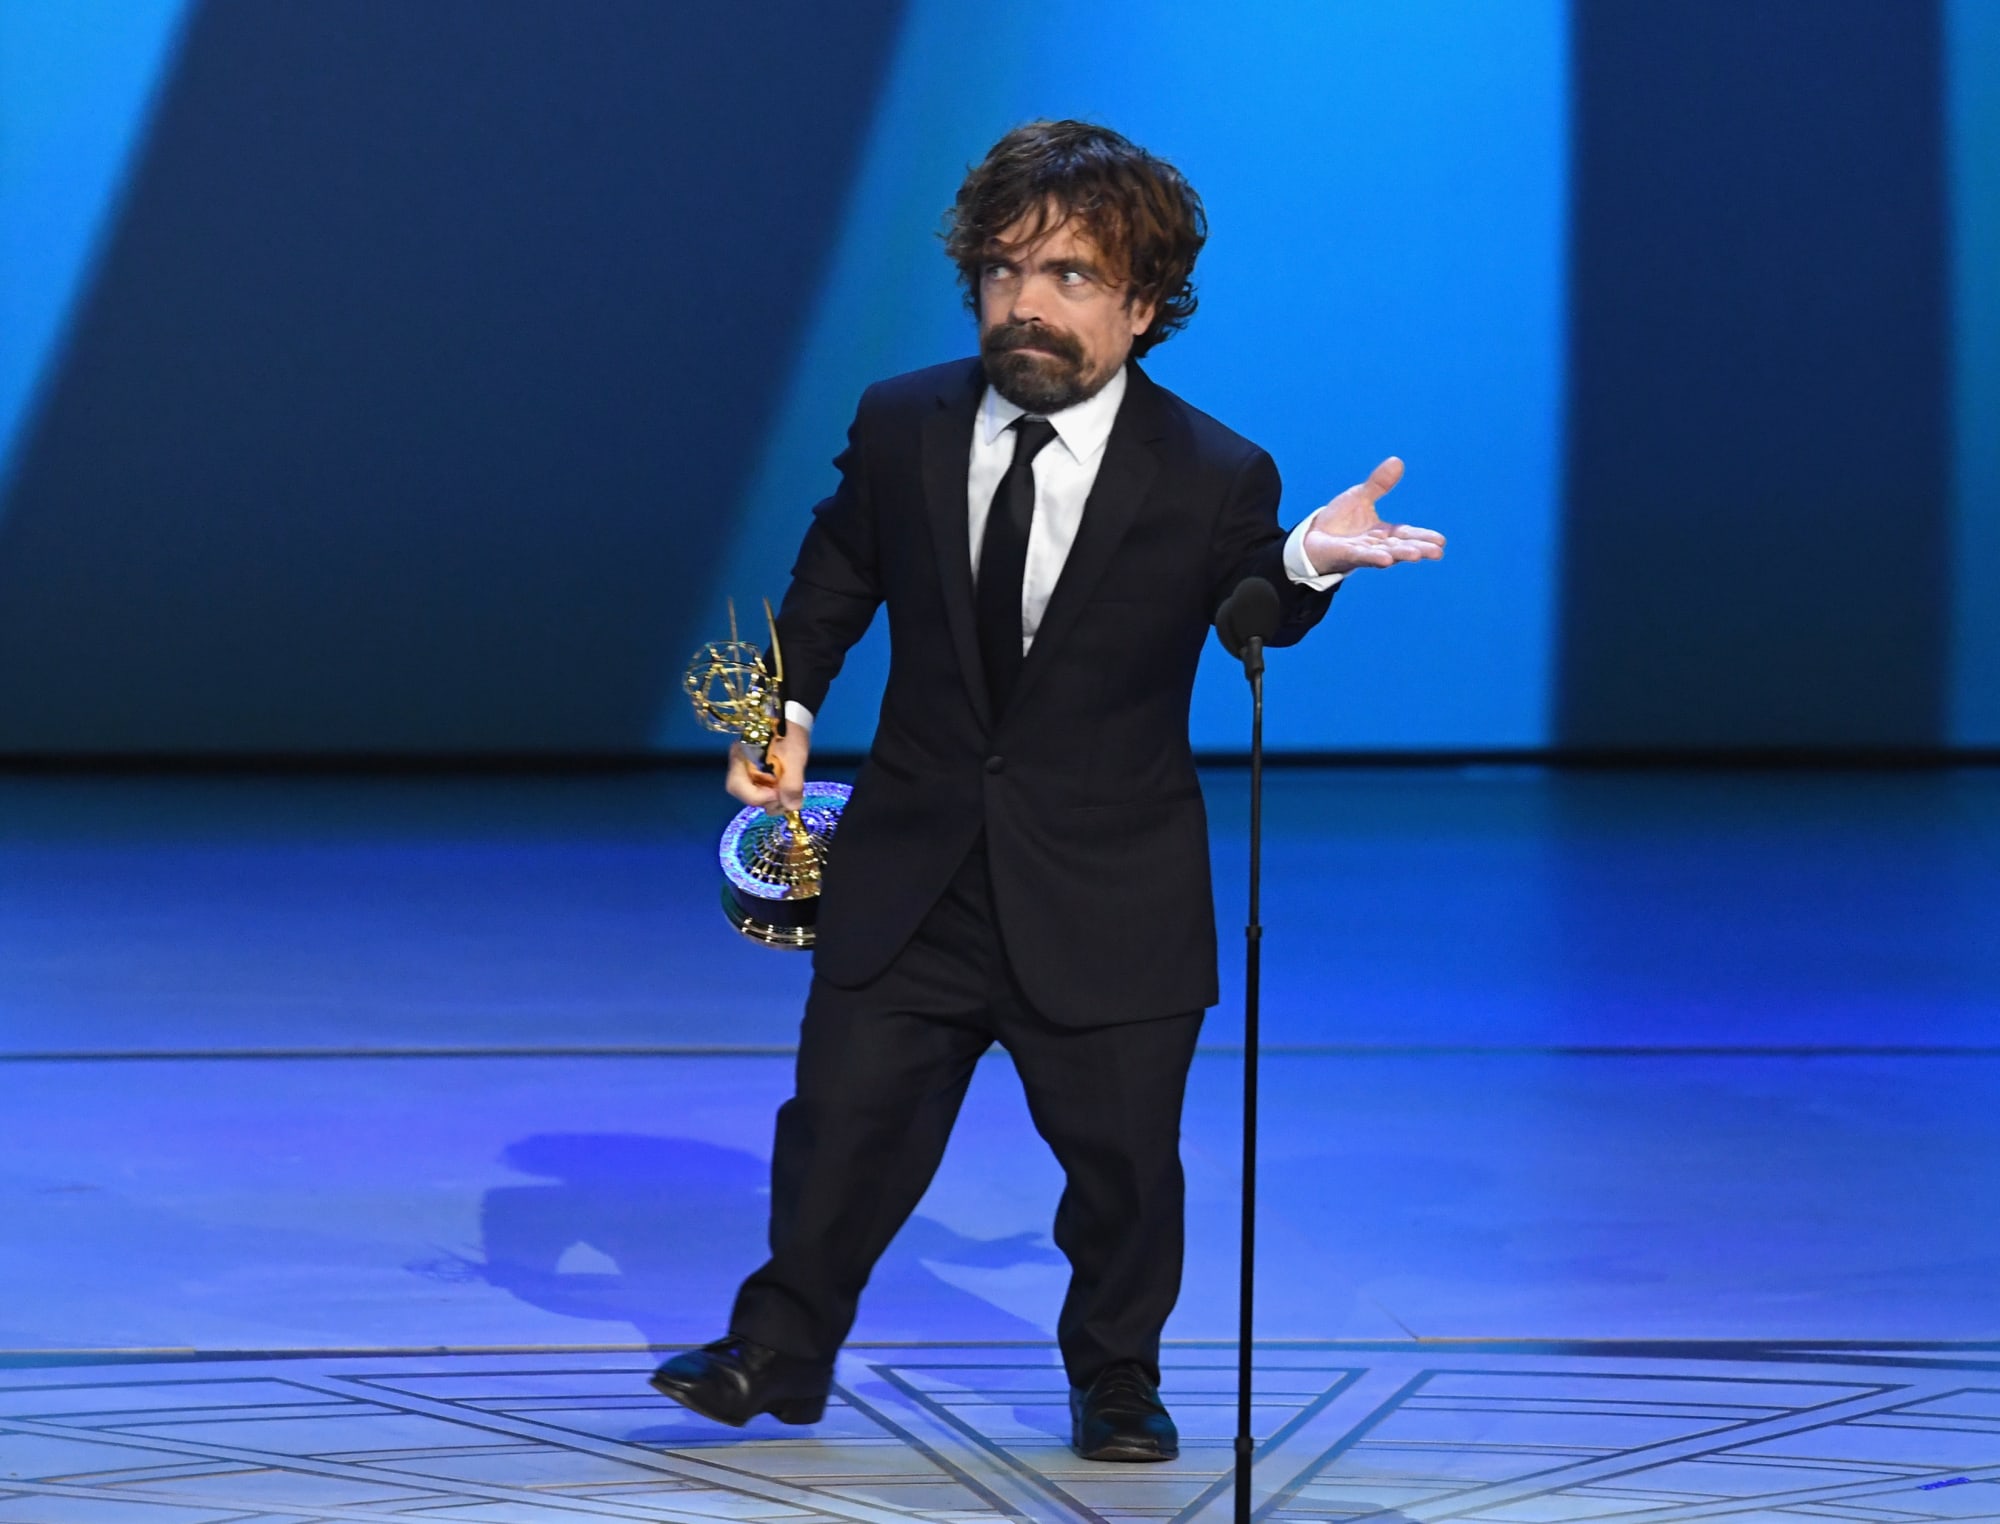 Peter Dinklage contemplates the end of Game of Thrones, next steps